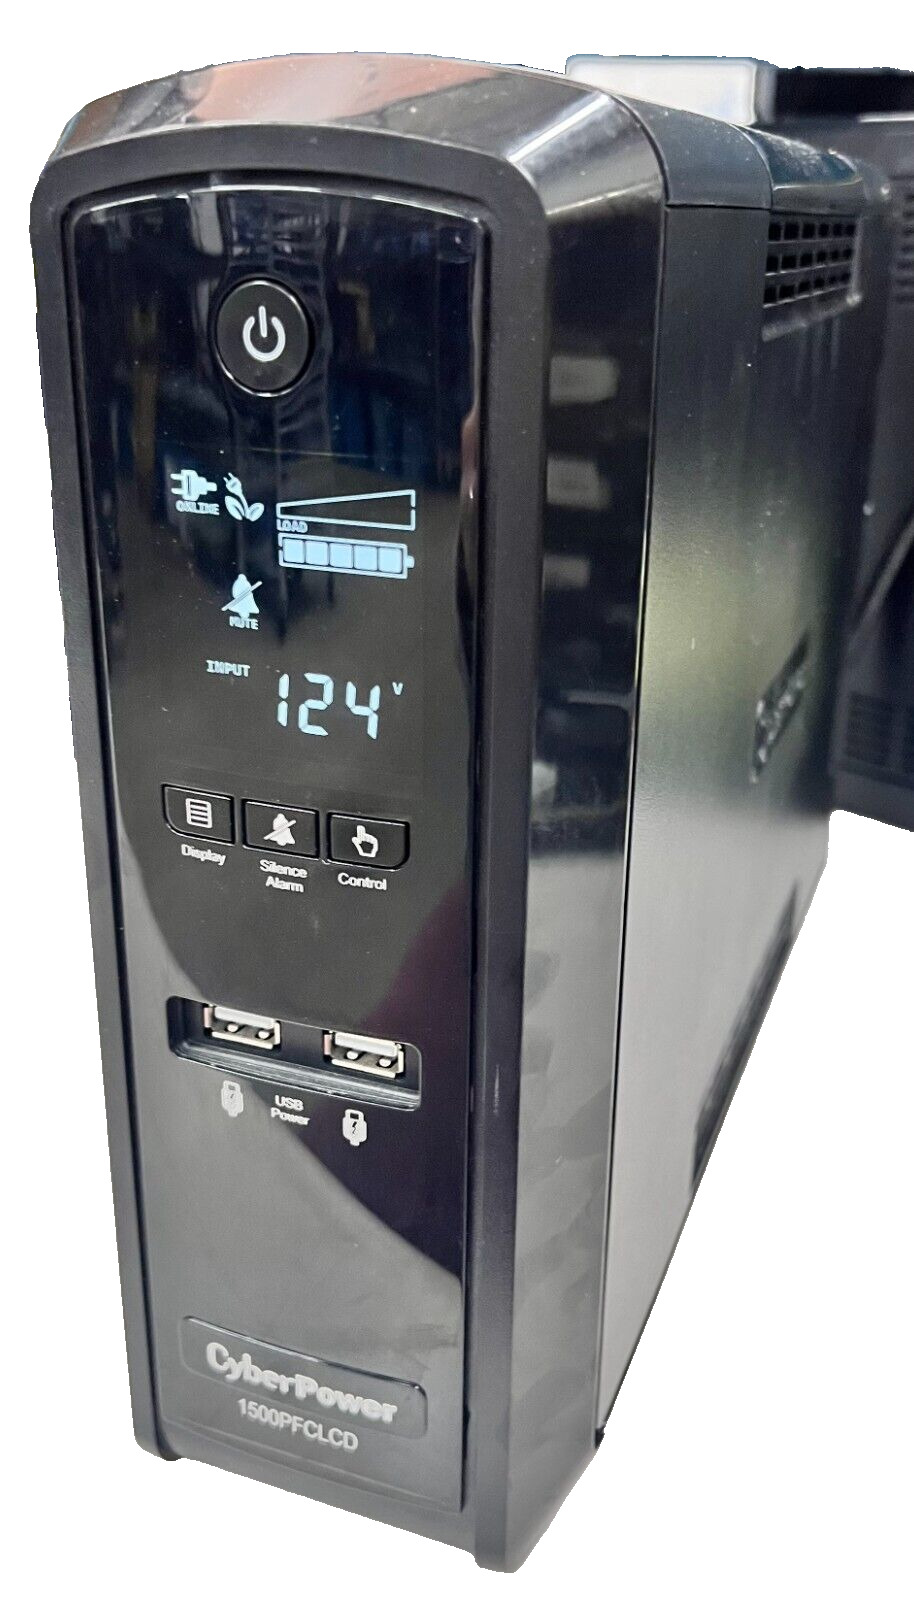 CyberPower 1500PFCLCD 10 Outlets LCD UPS (Tested)